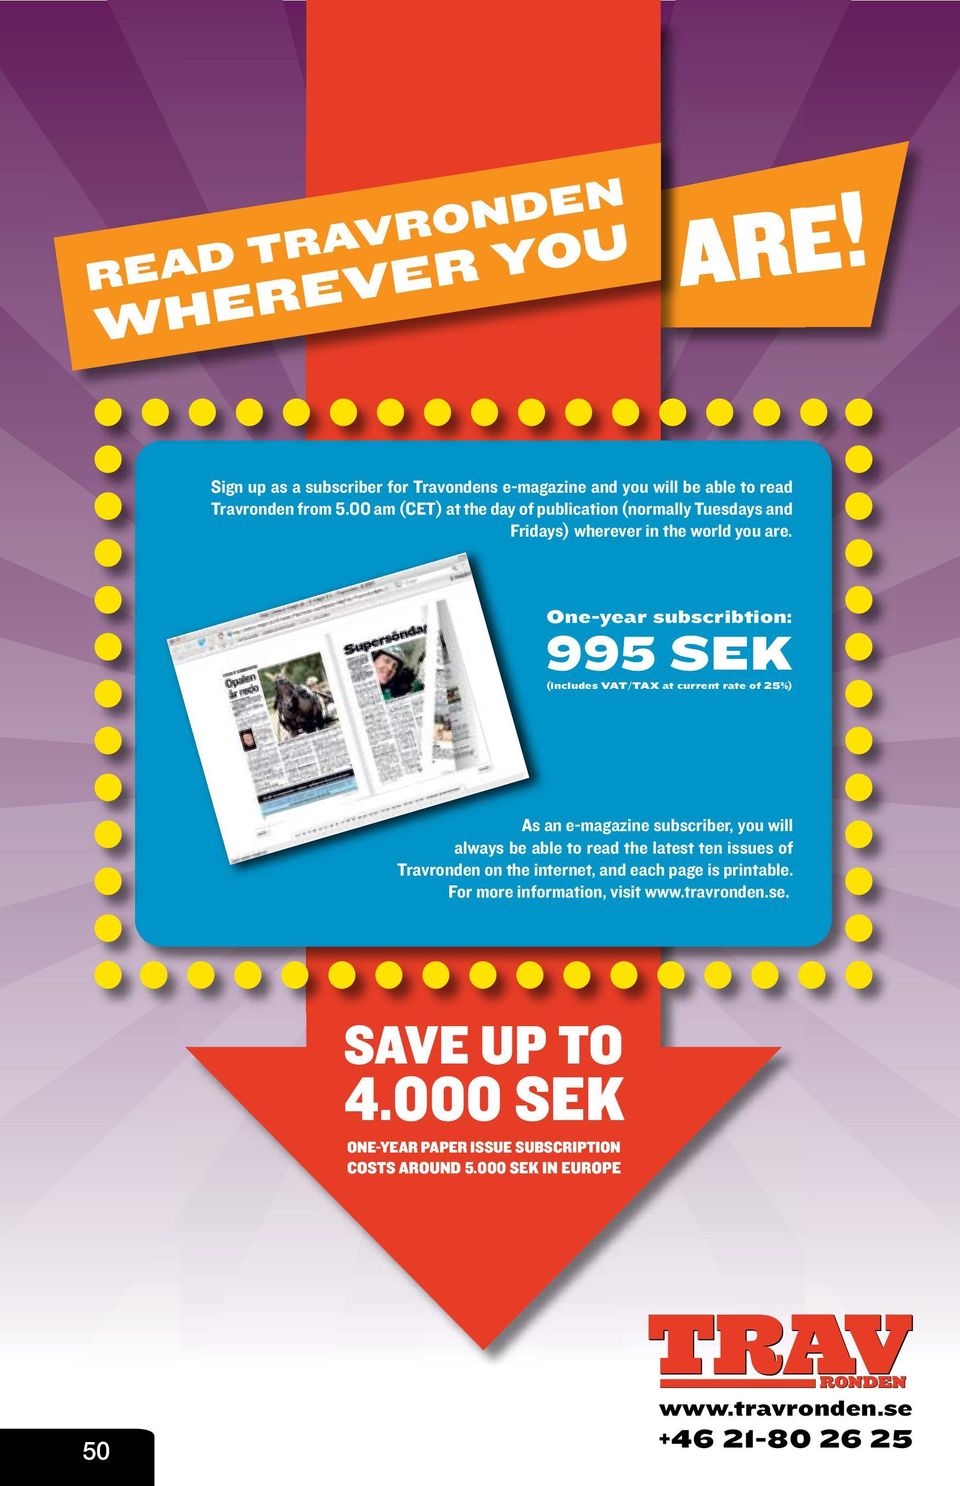 One-year subscribtion: 995 SEK (includes VAT/TAX at current rate of 25%) As an e-magazine subscriber, you will always be able to read the latest ten